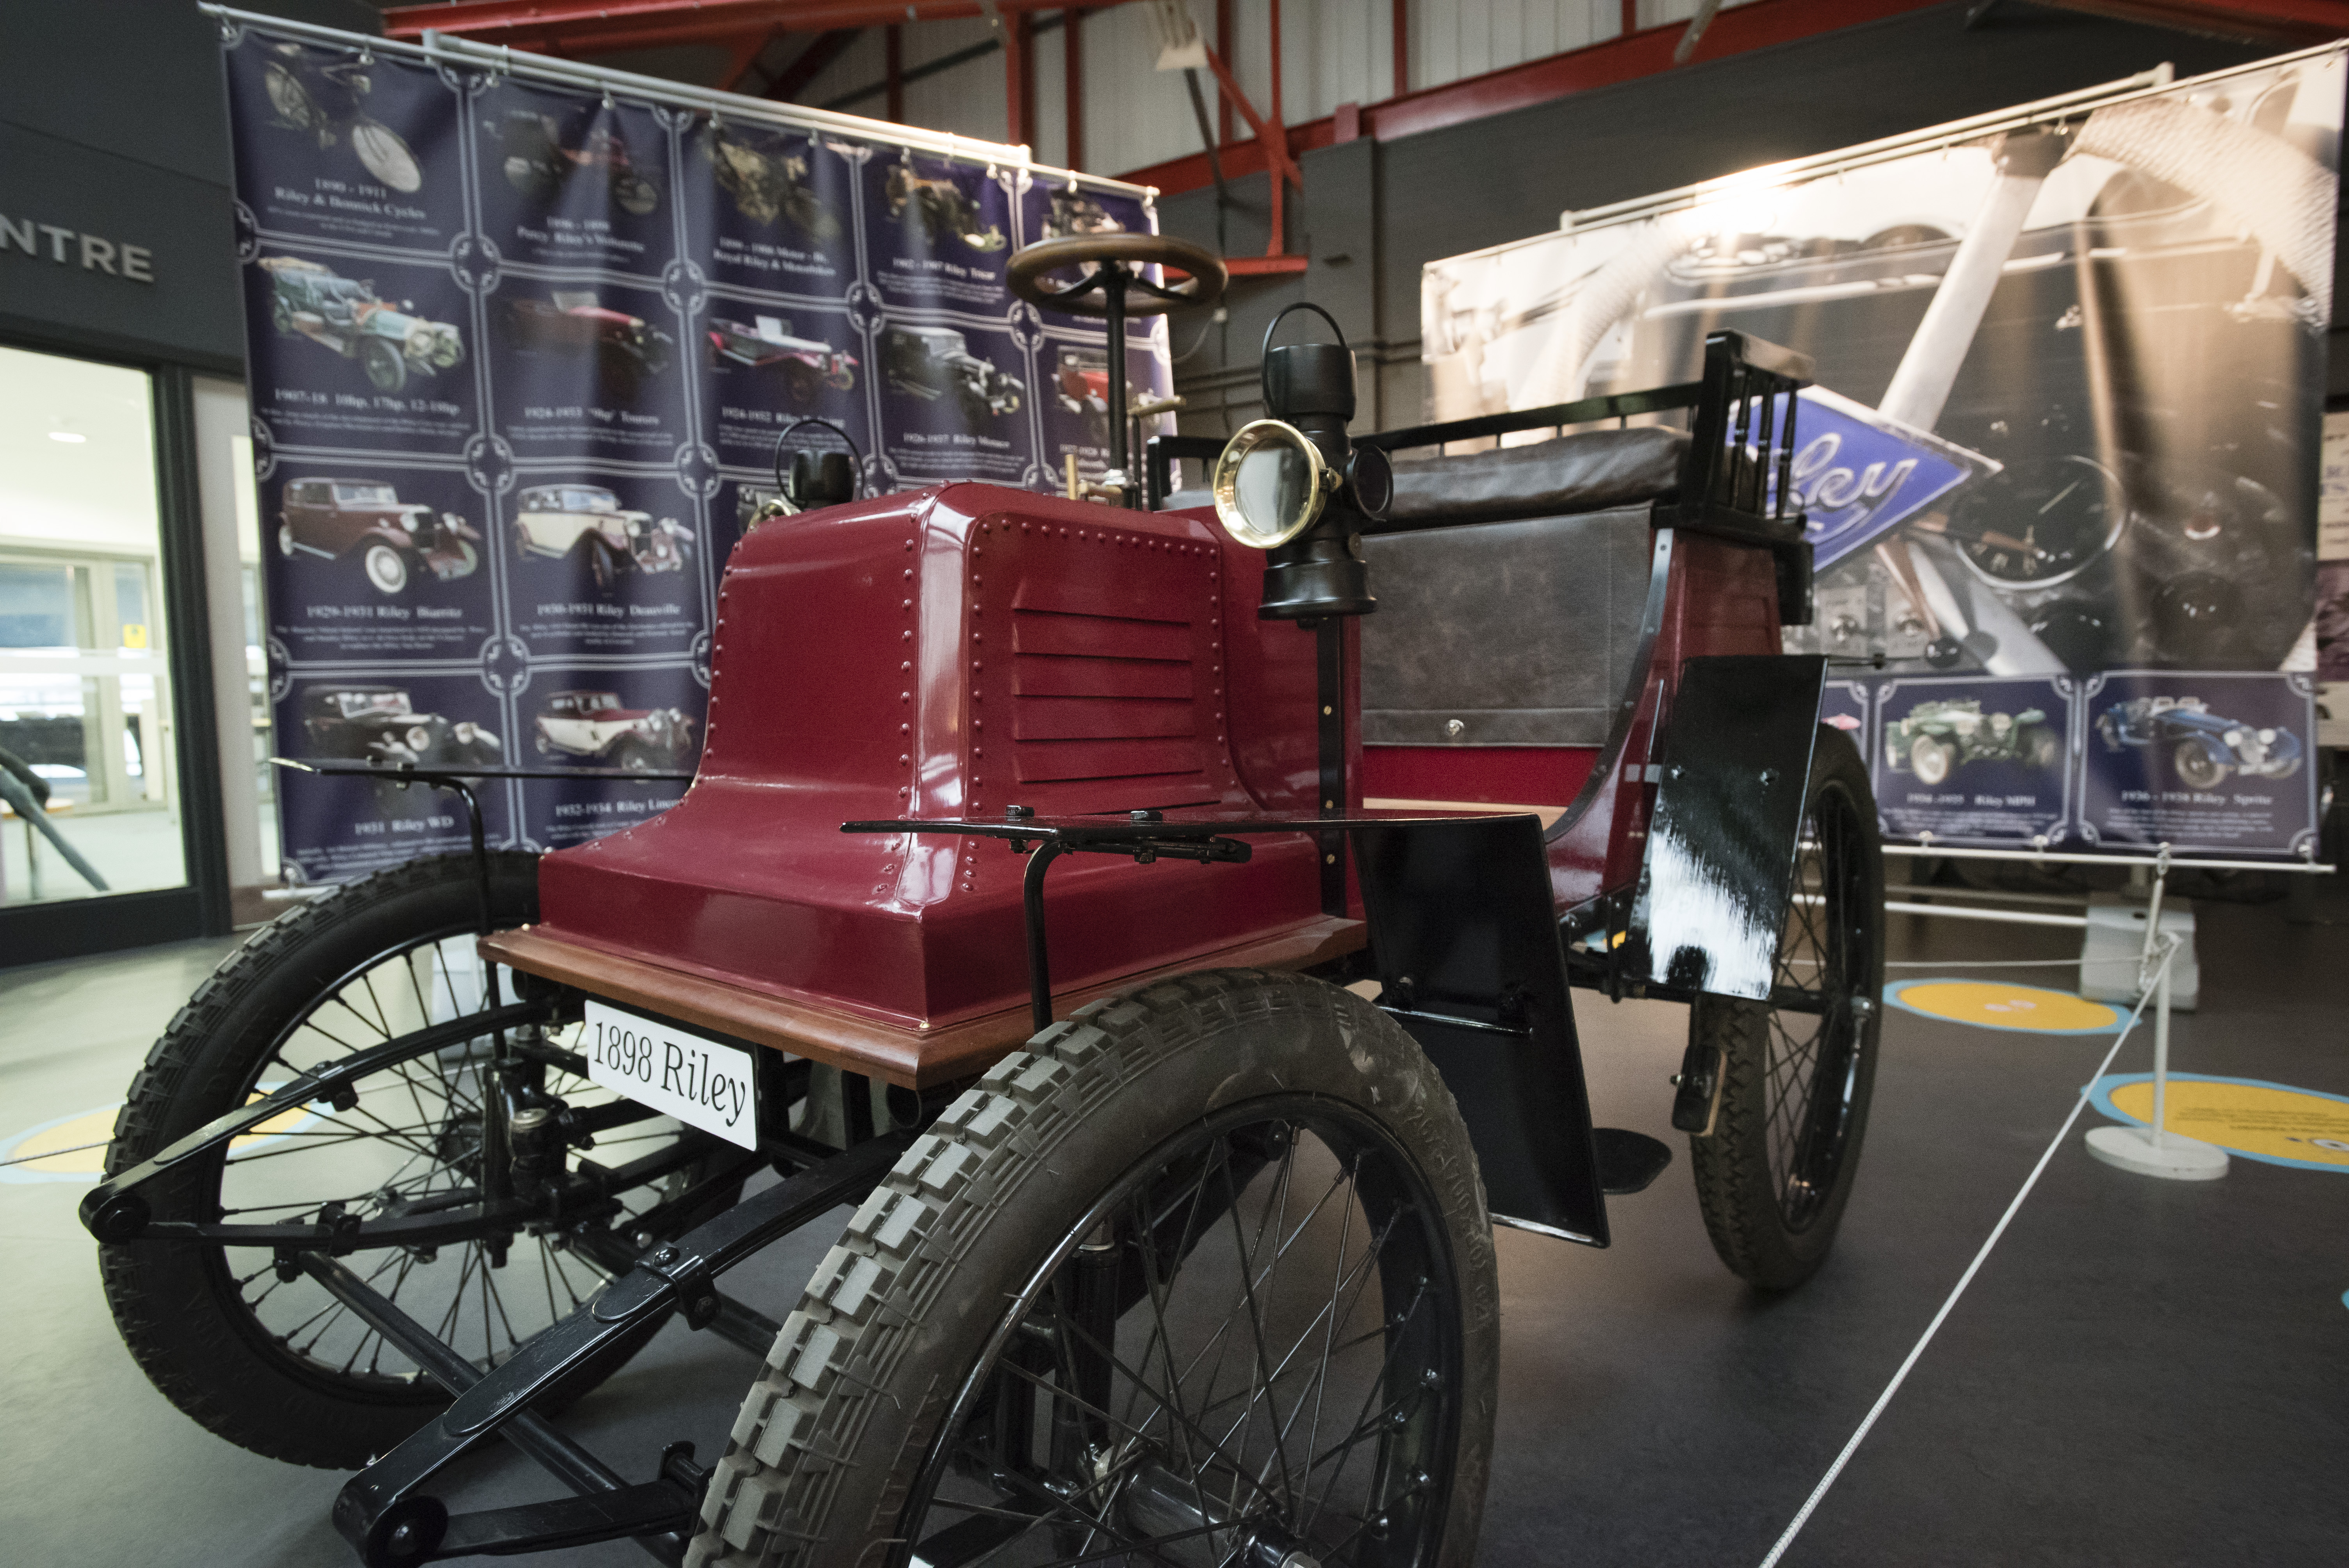 Newswise: Replica of first Riley car will be back on the road with help from WMG